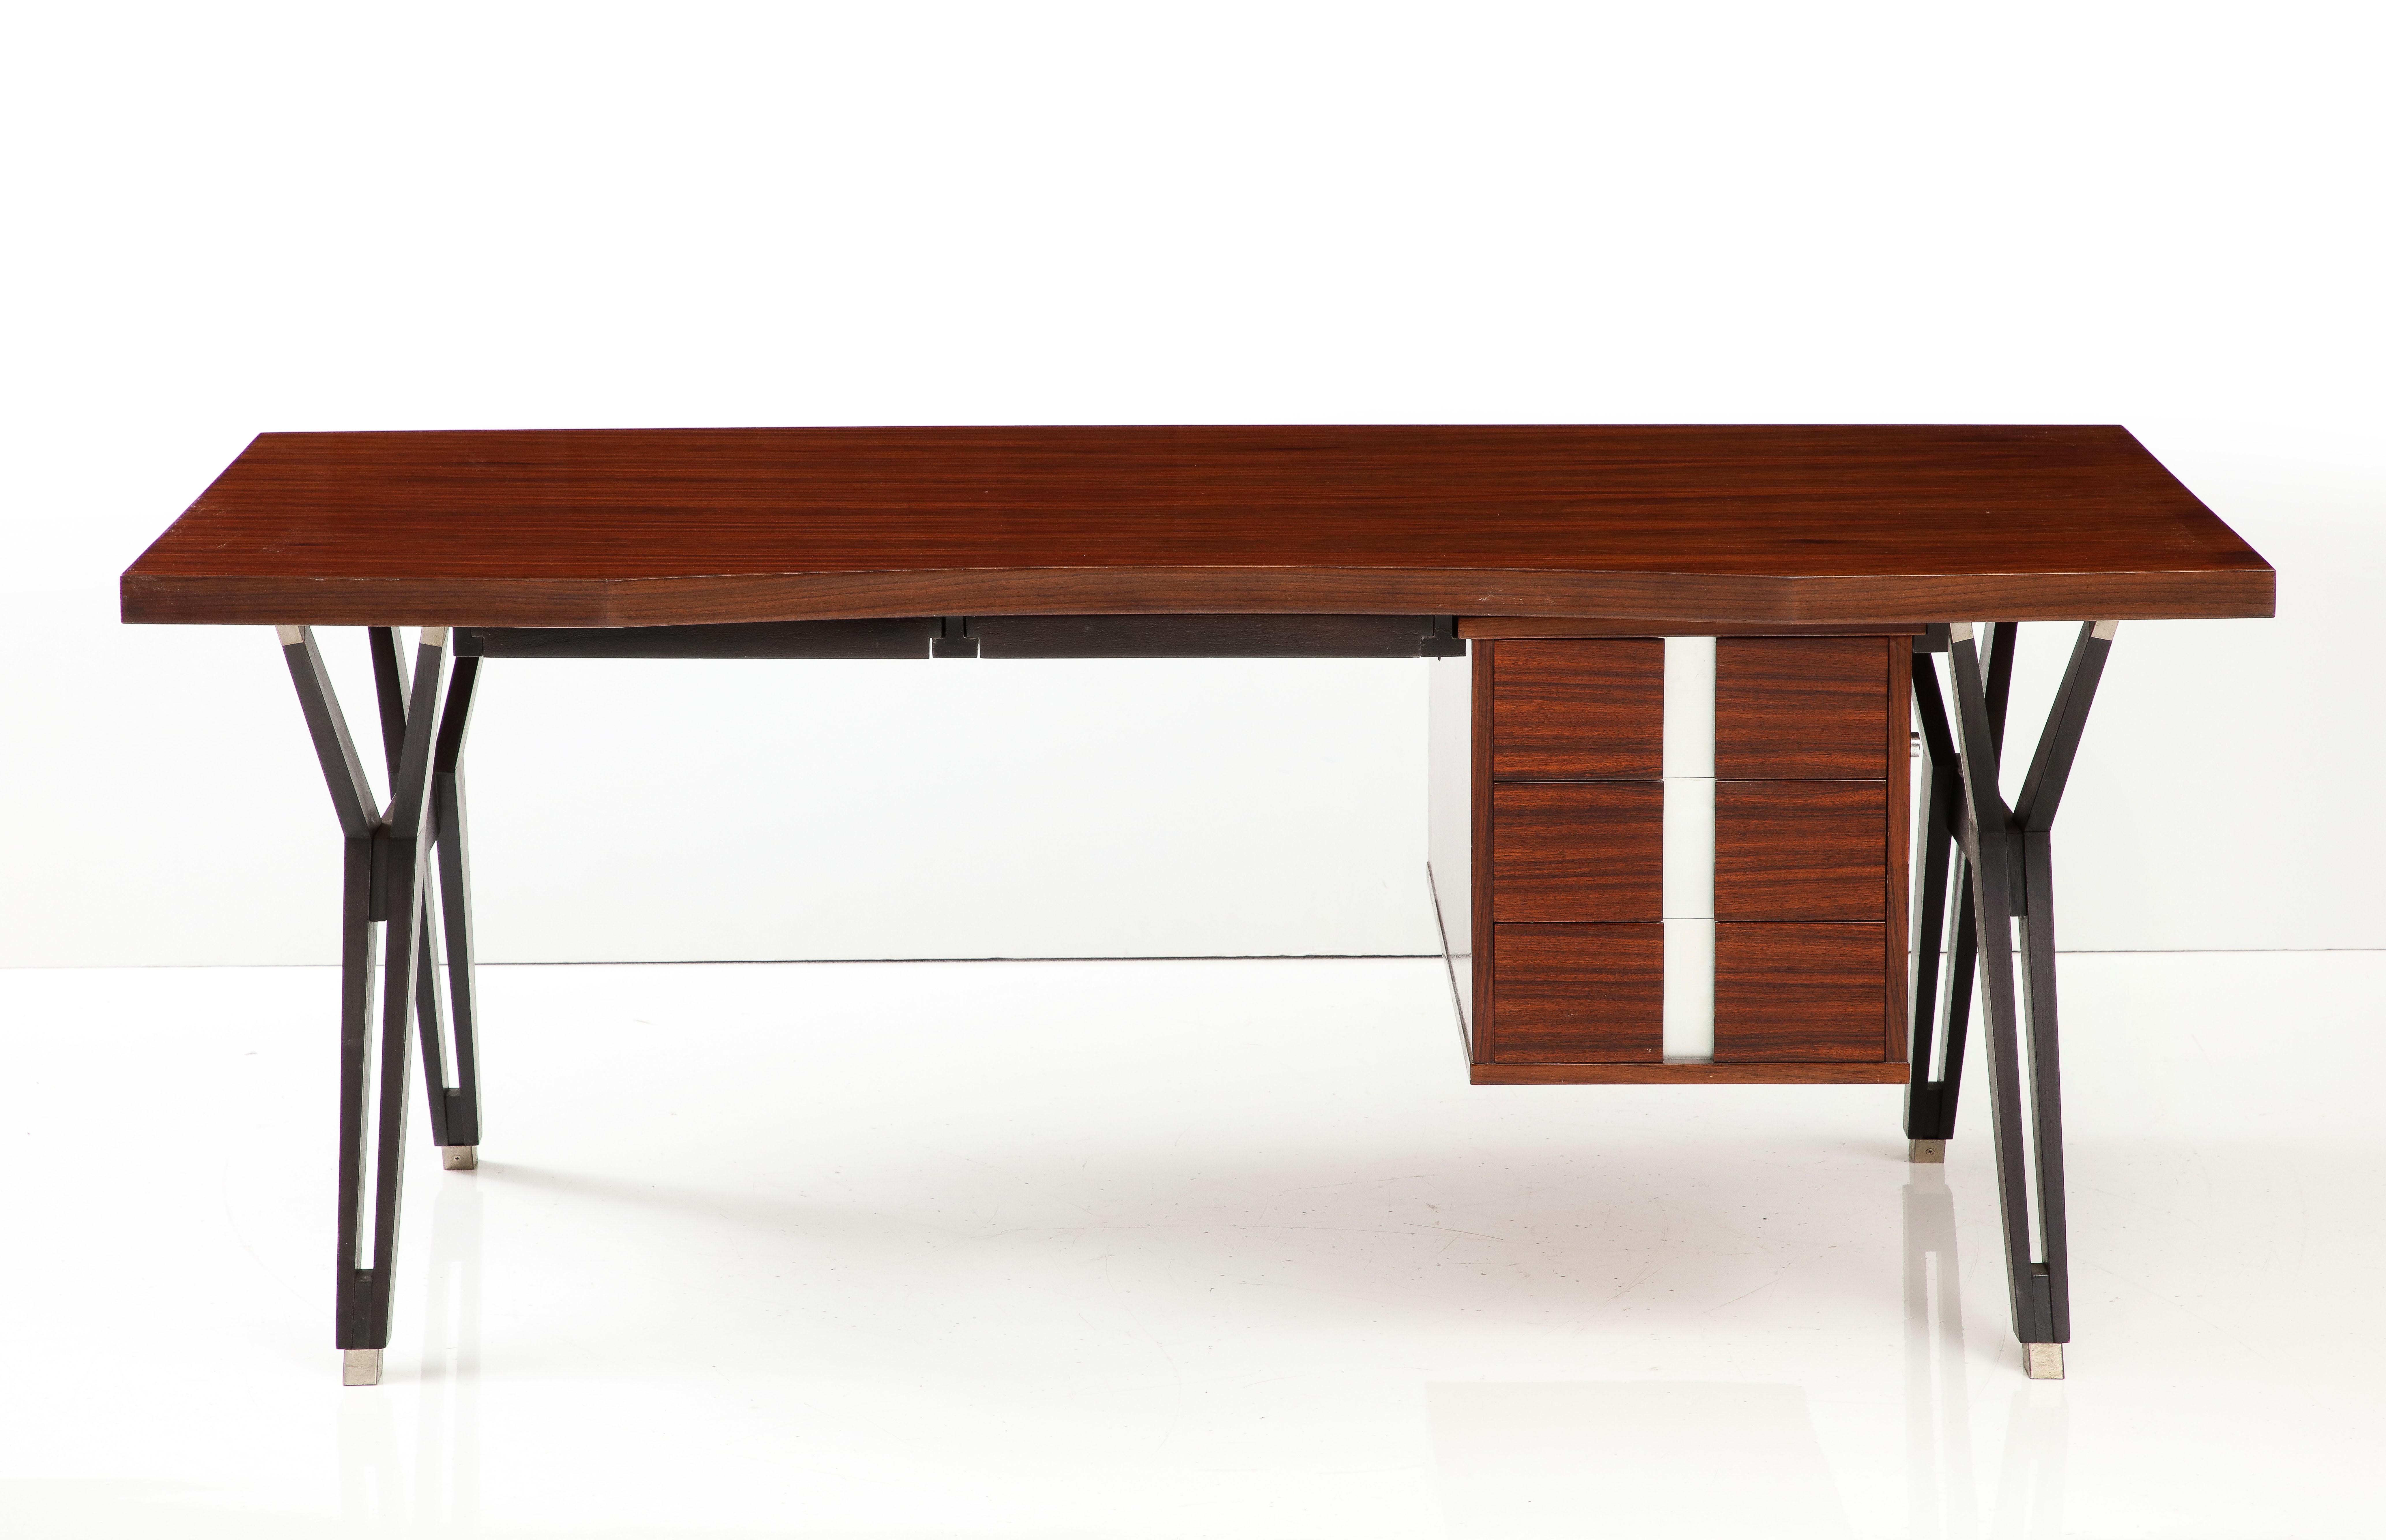 This iconic Mid-Century Modern executive desk was the result of a collaboration between the masterful Italian architect and designer, Ico Parisi and his wife, Luisa, a student of Gio Ponti. The 